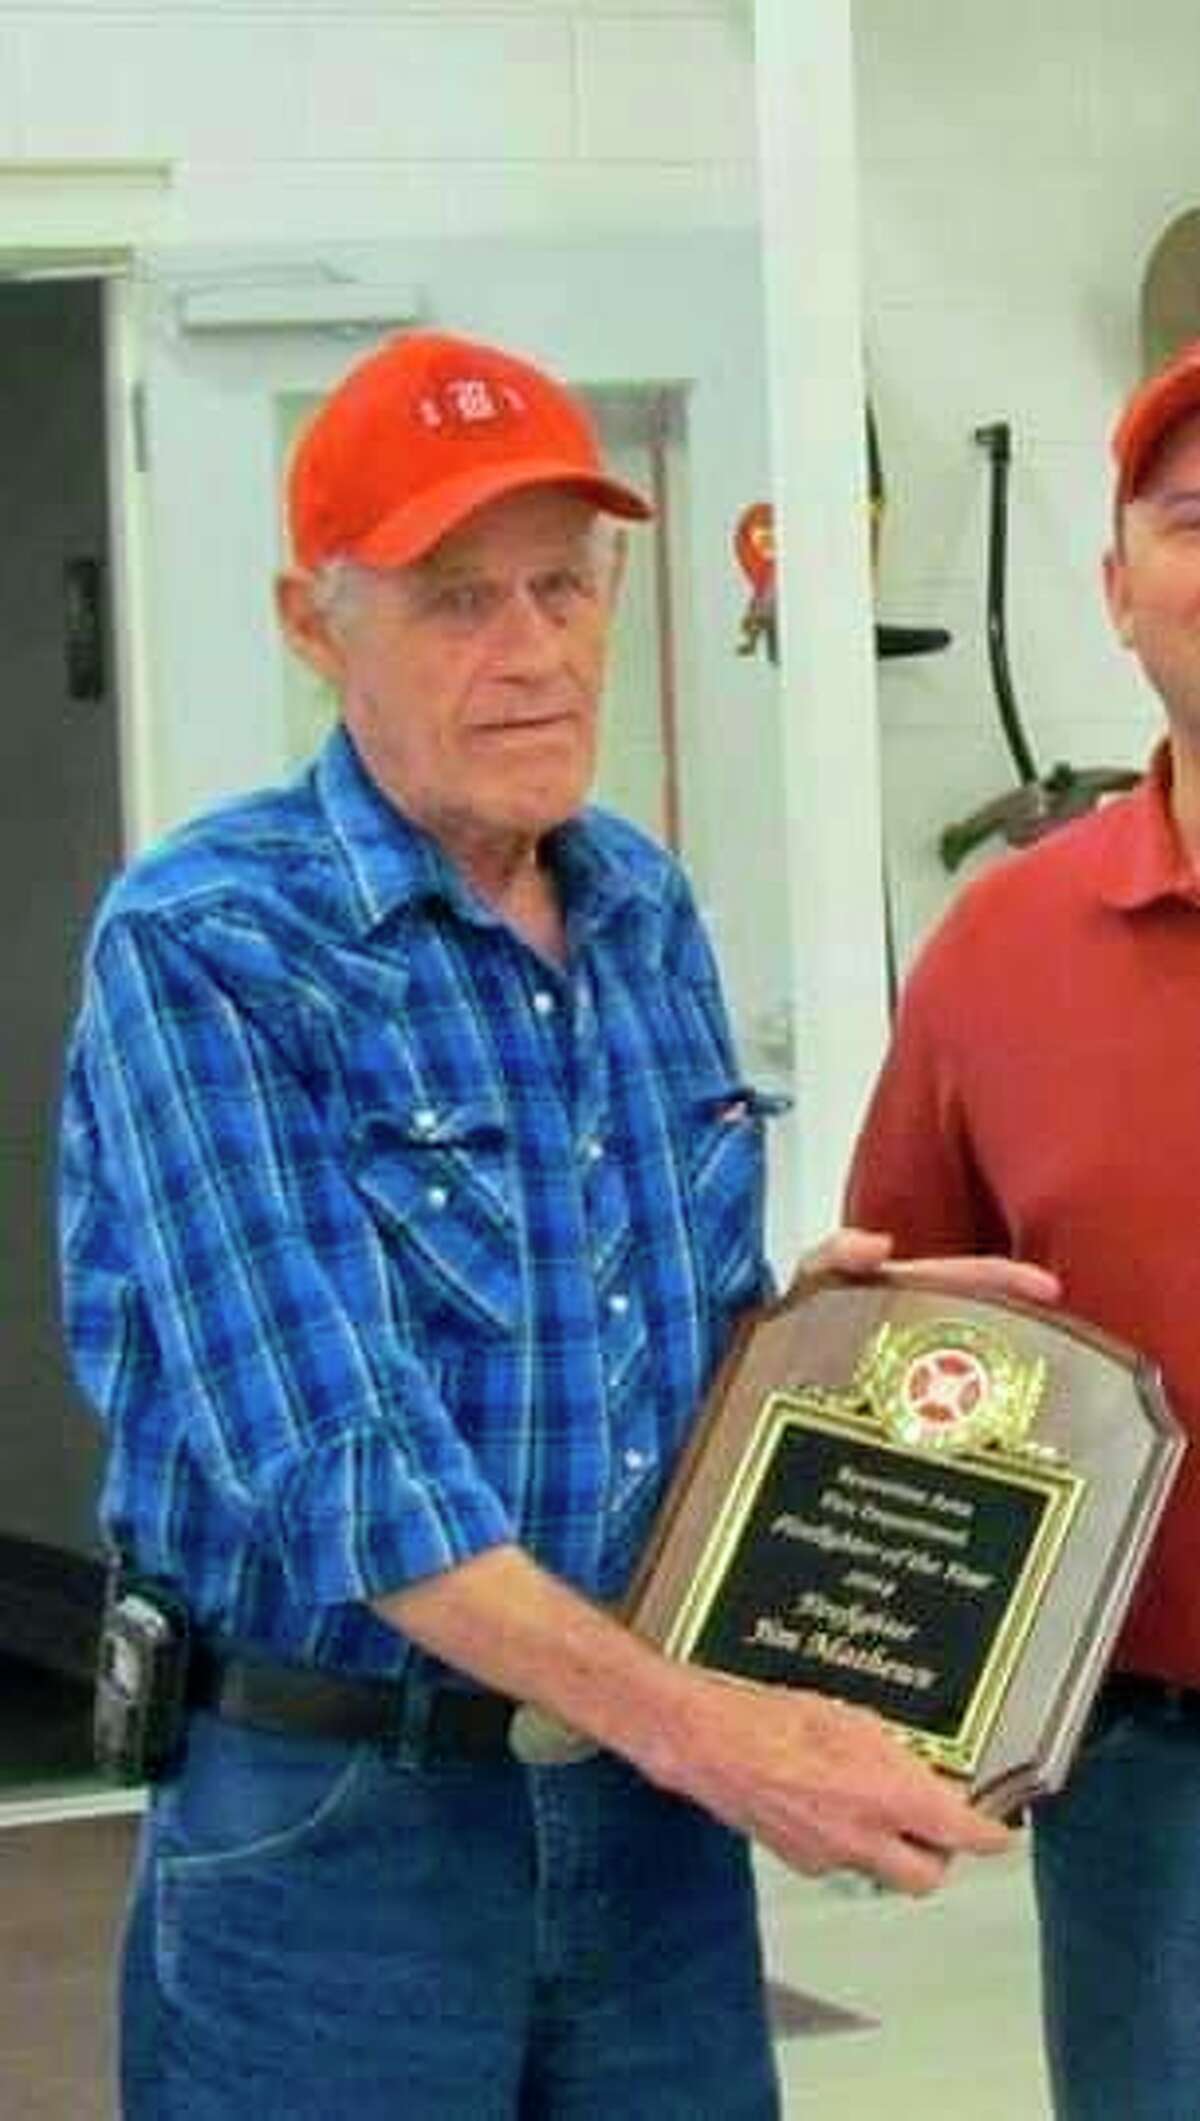 Thomas "Jim" Mathews, 81, lost his battle with Covid-19 on Dec. 3, following a week in the hospital. (Photo Provided)